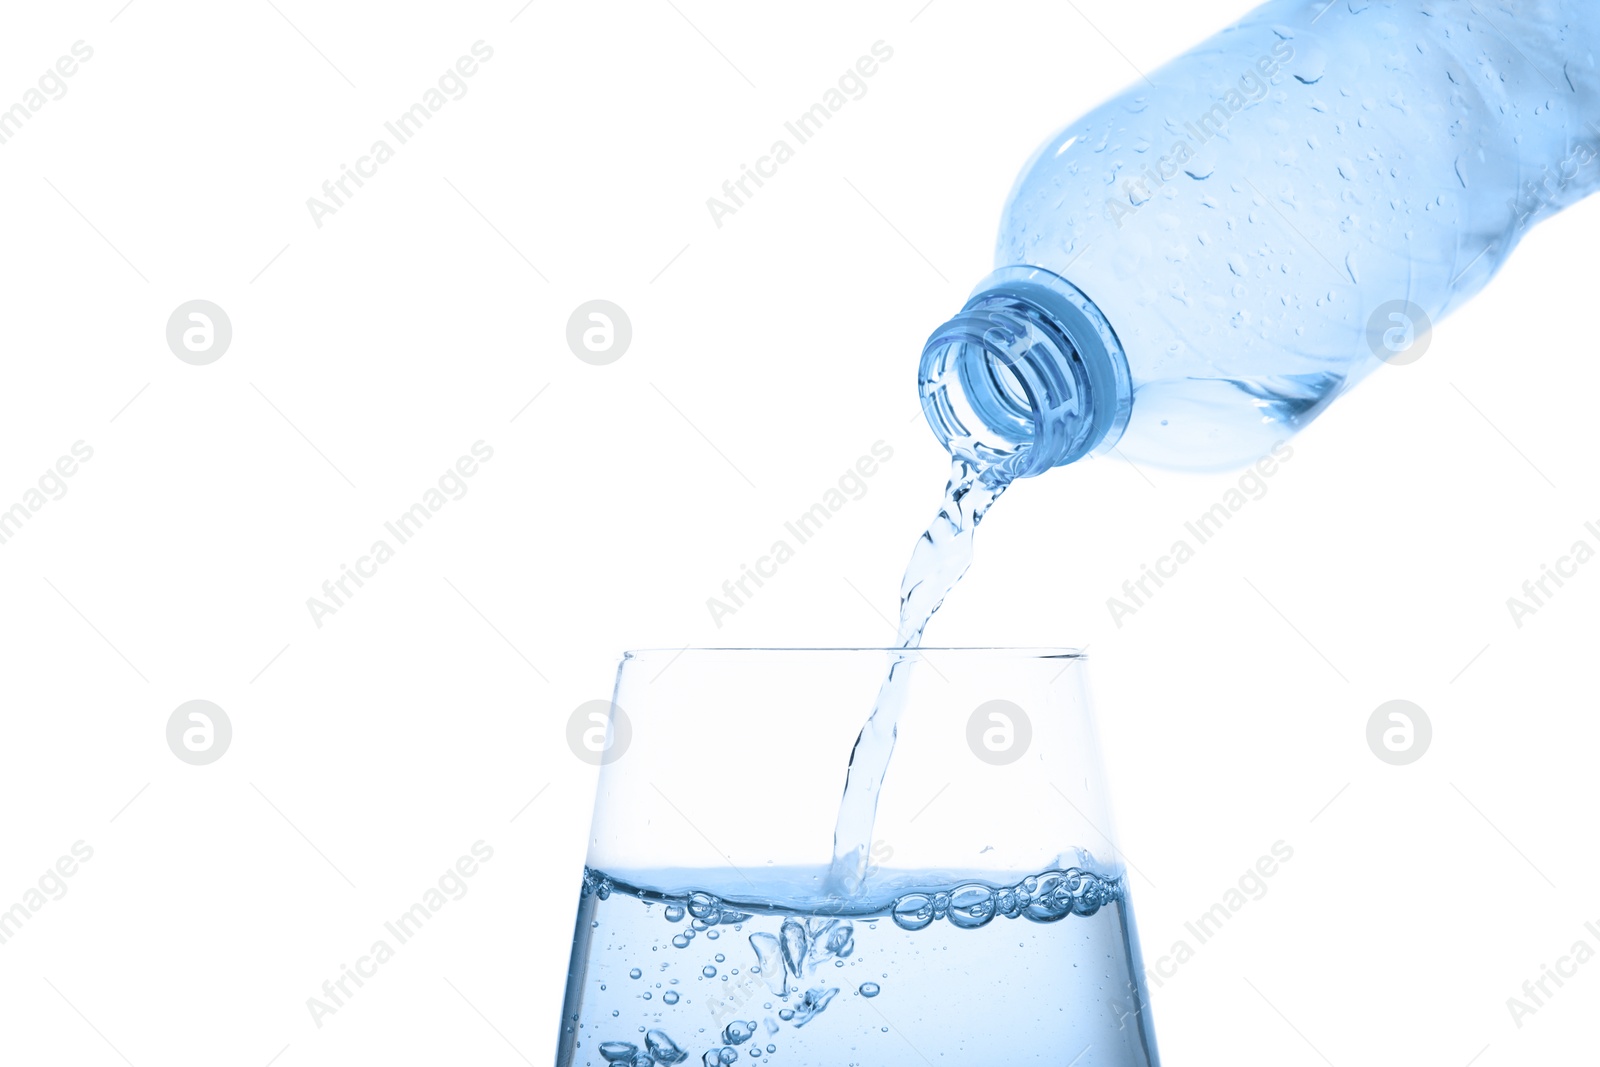 Photo of Pouring water from bottle into glass against blue background. Refreshing drink